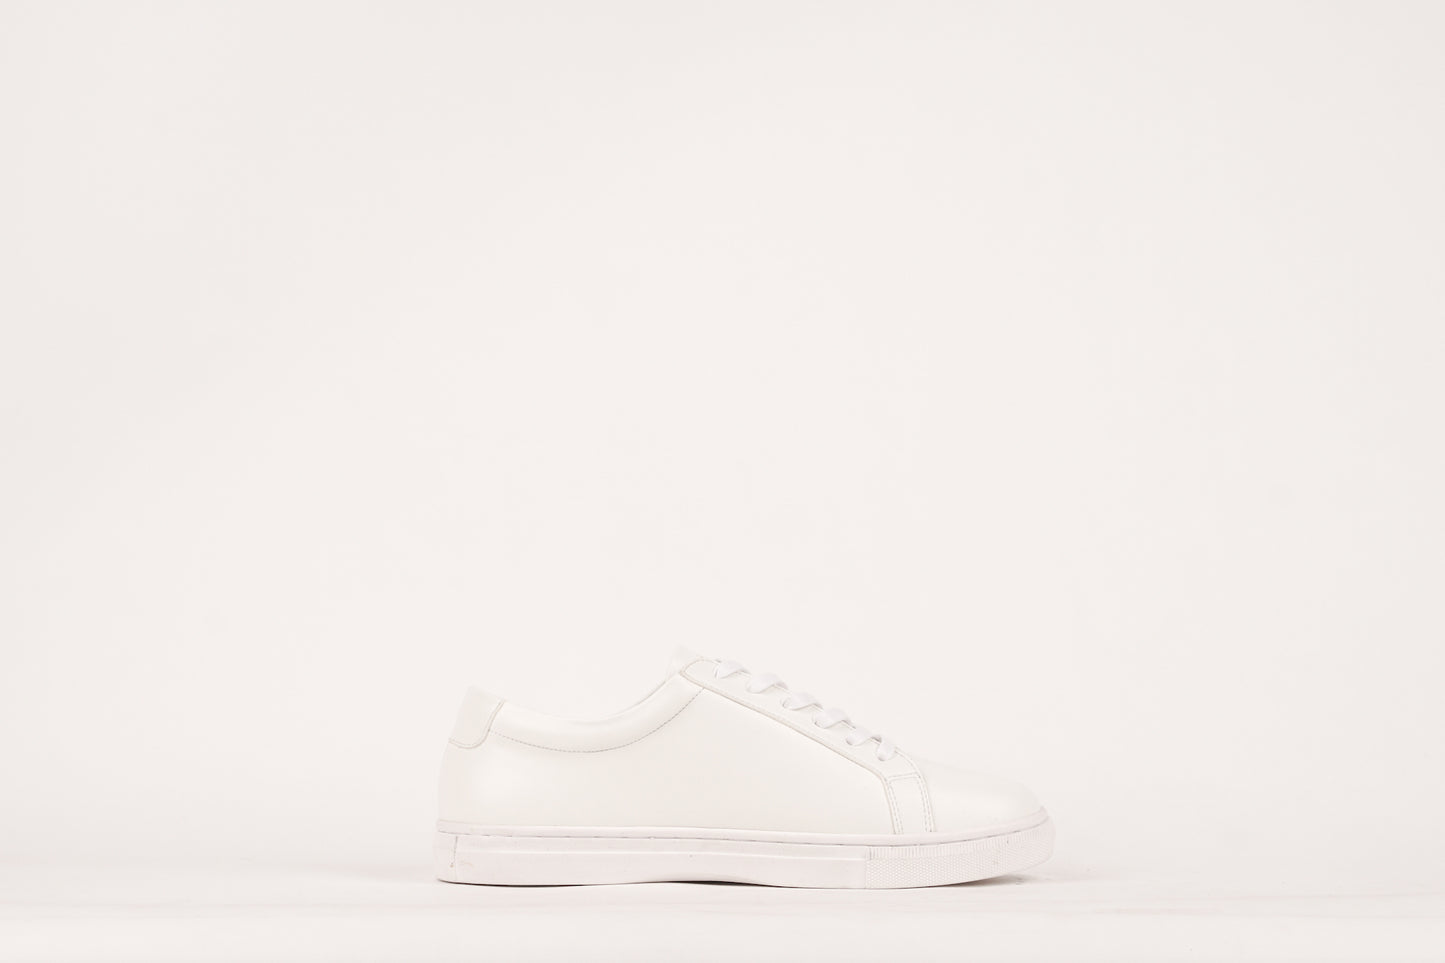 LAH-00 x JUICY LUICY | TRIPLE WHITE | UNISEX [LIMITED EDITION] - Gio Cardin